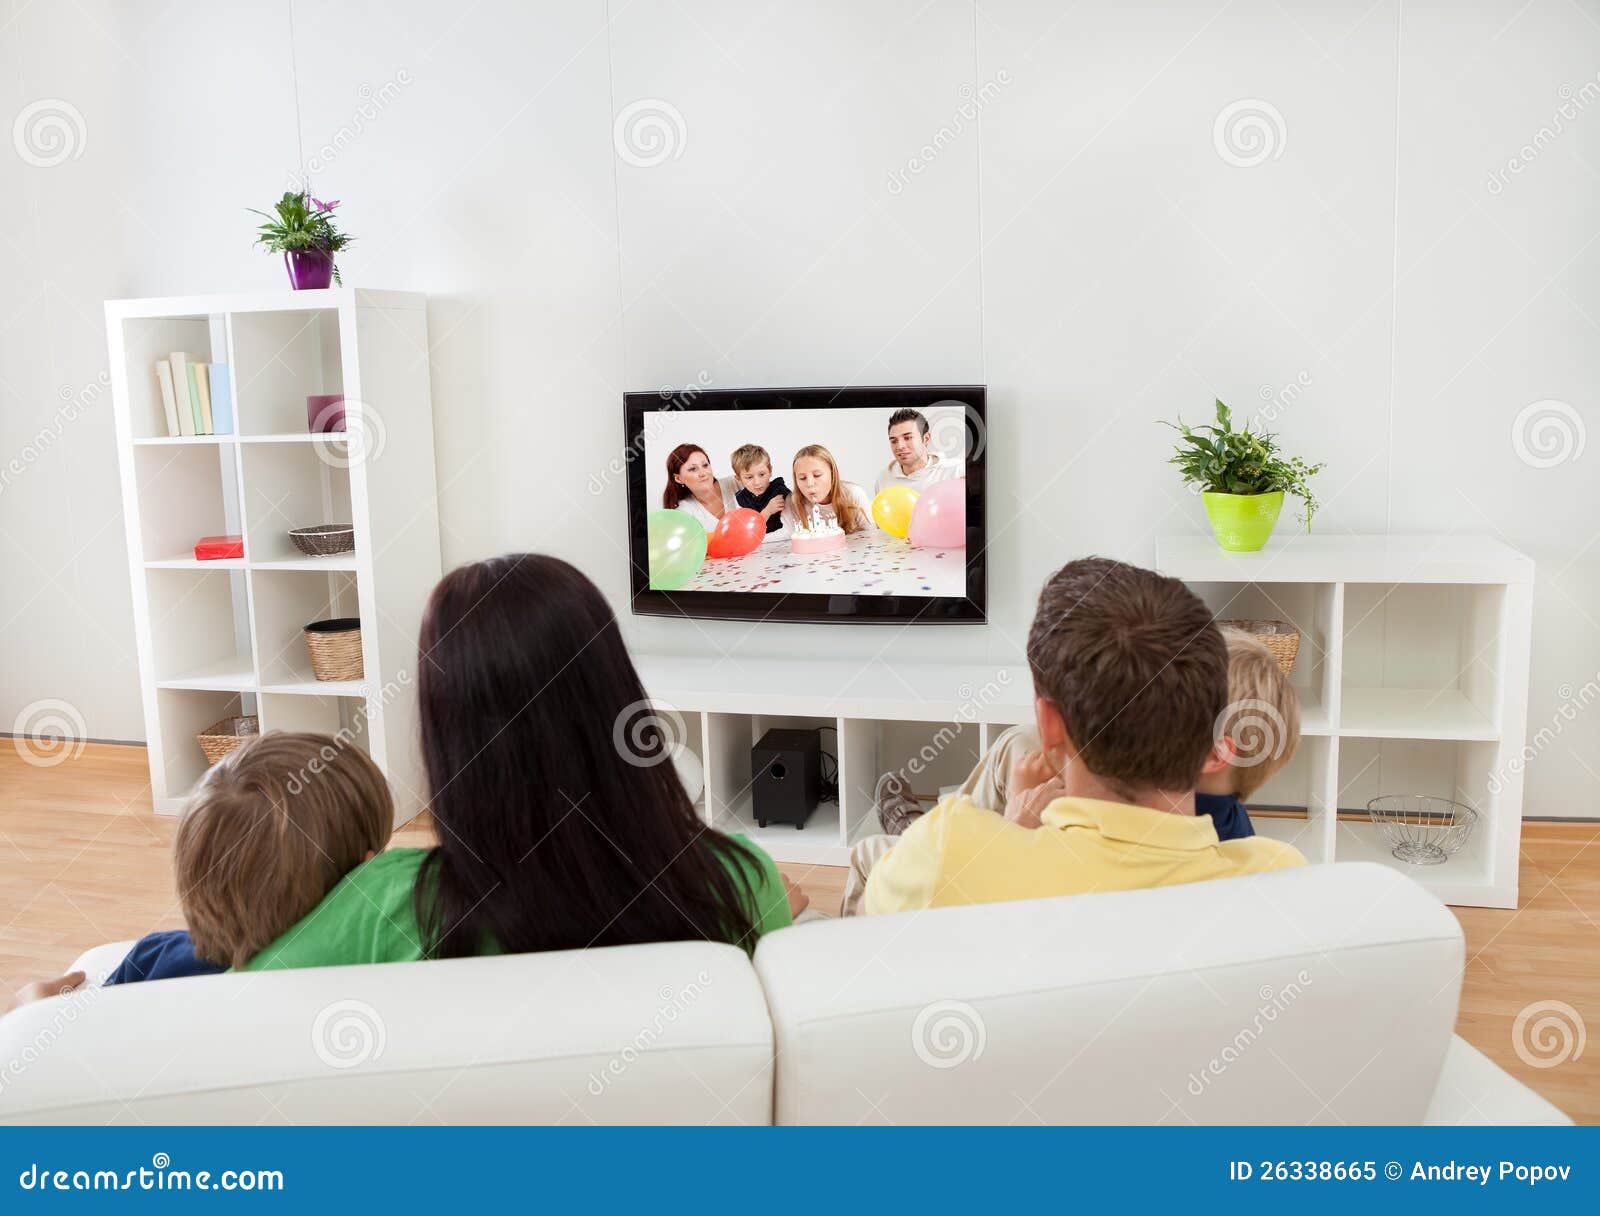 young family watching tv